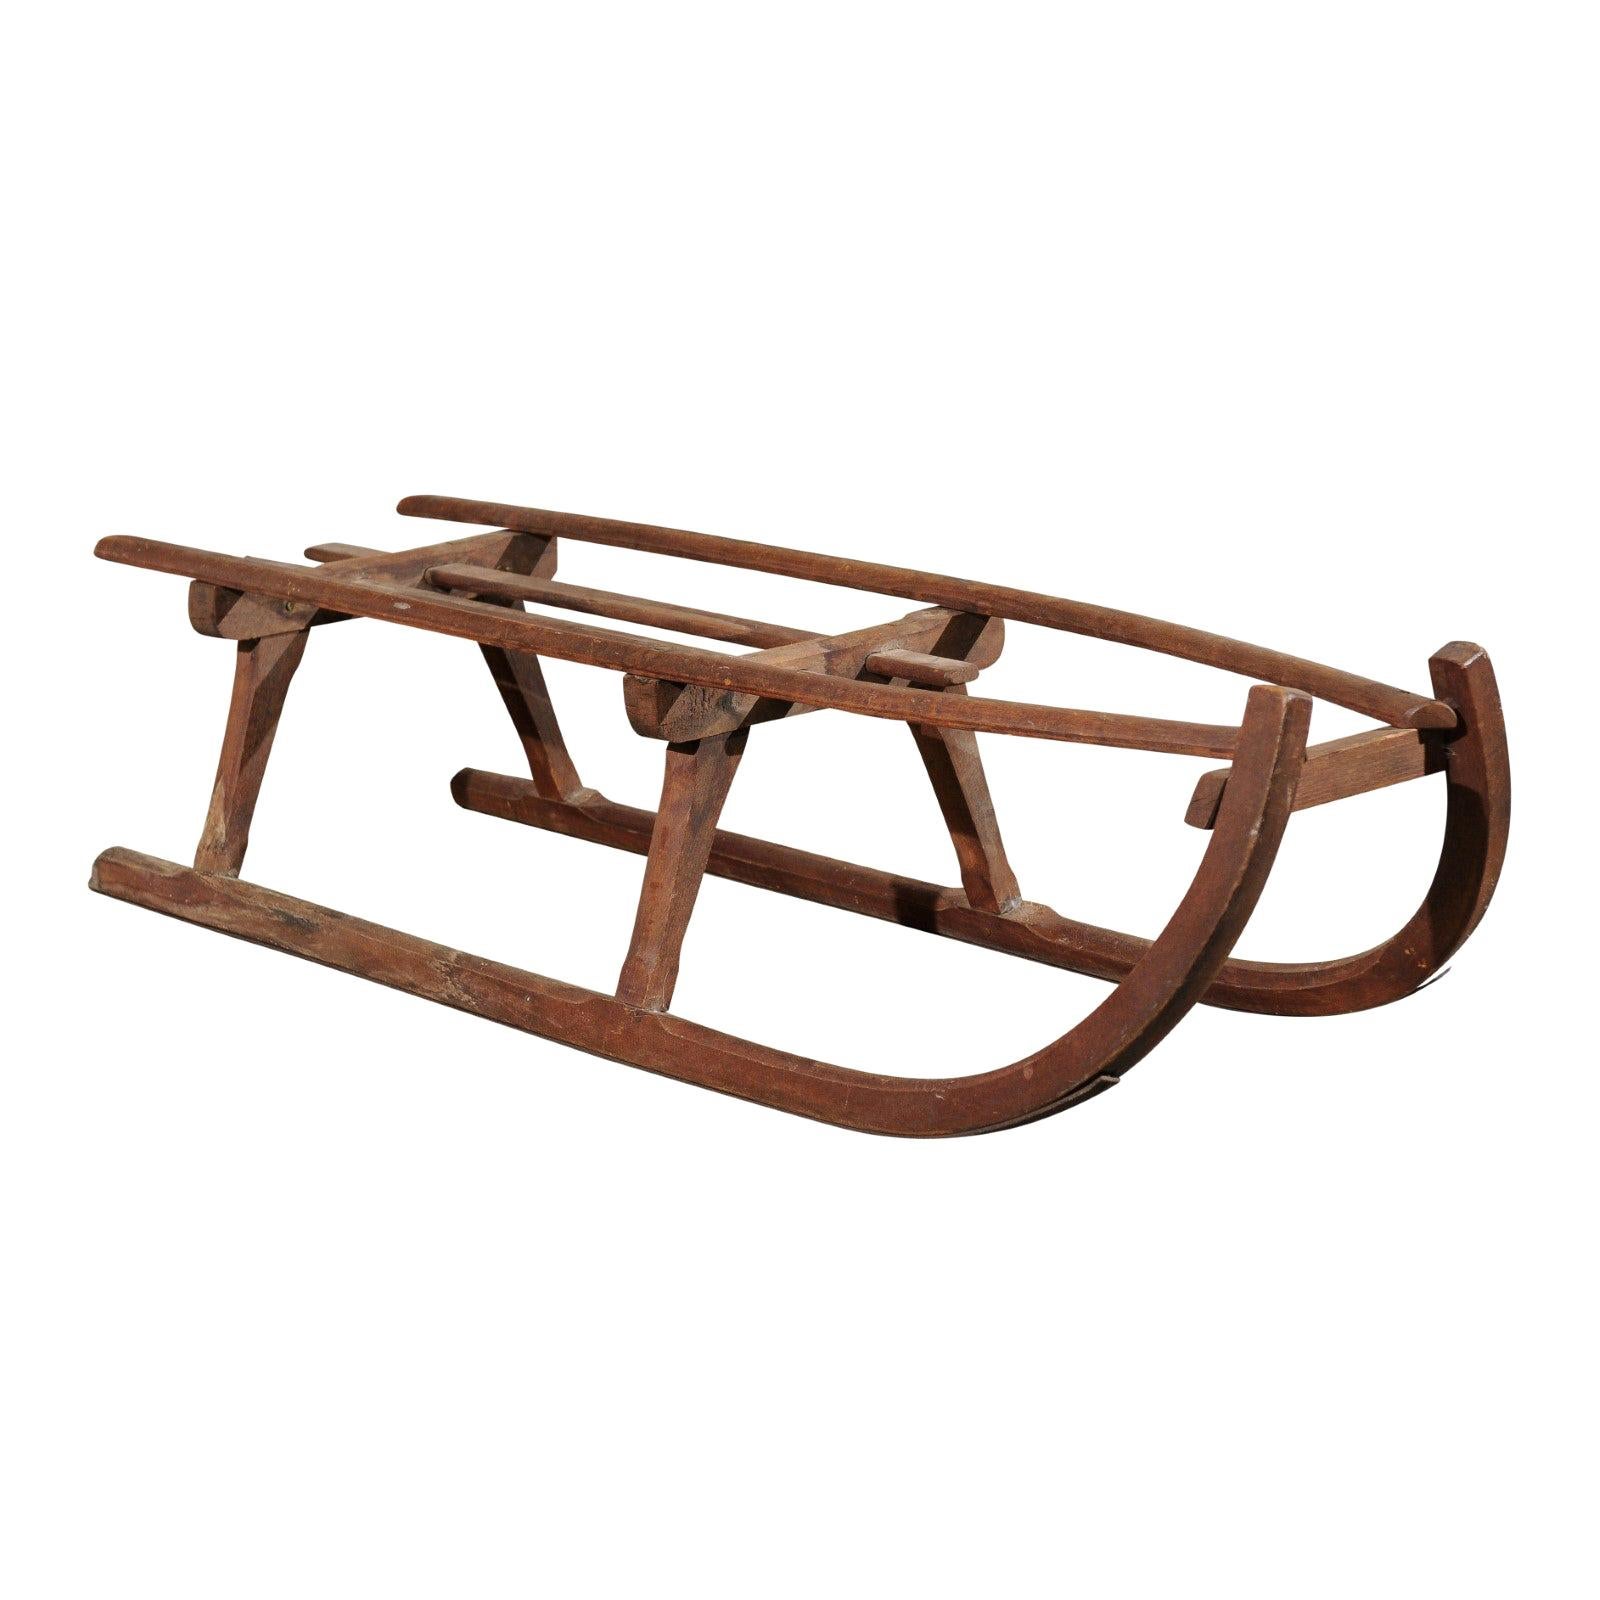 Rustic 19th Century French Wooden Sled with Weathered Patina and Curving Base For Sale